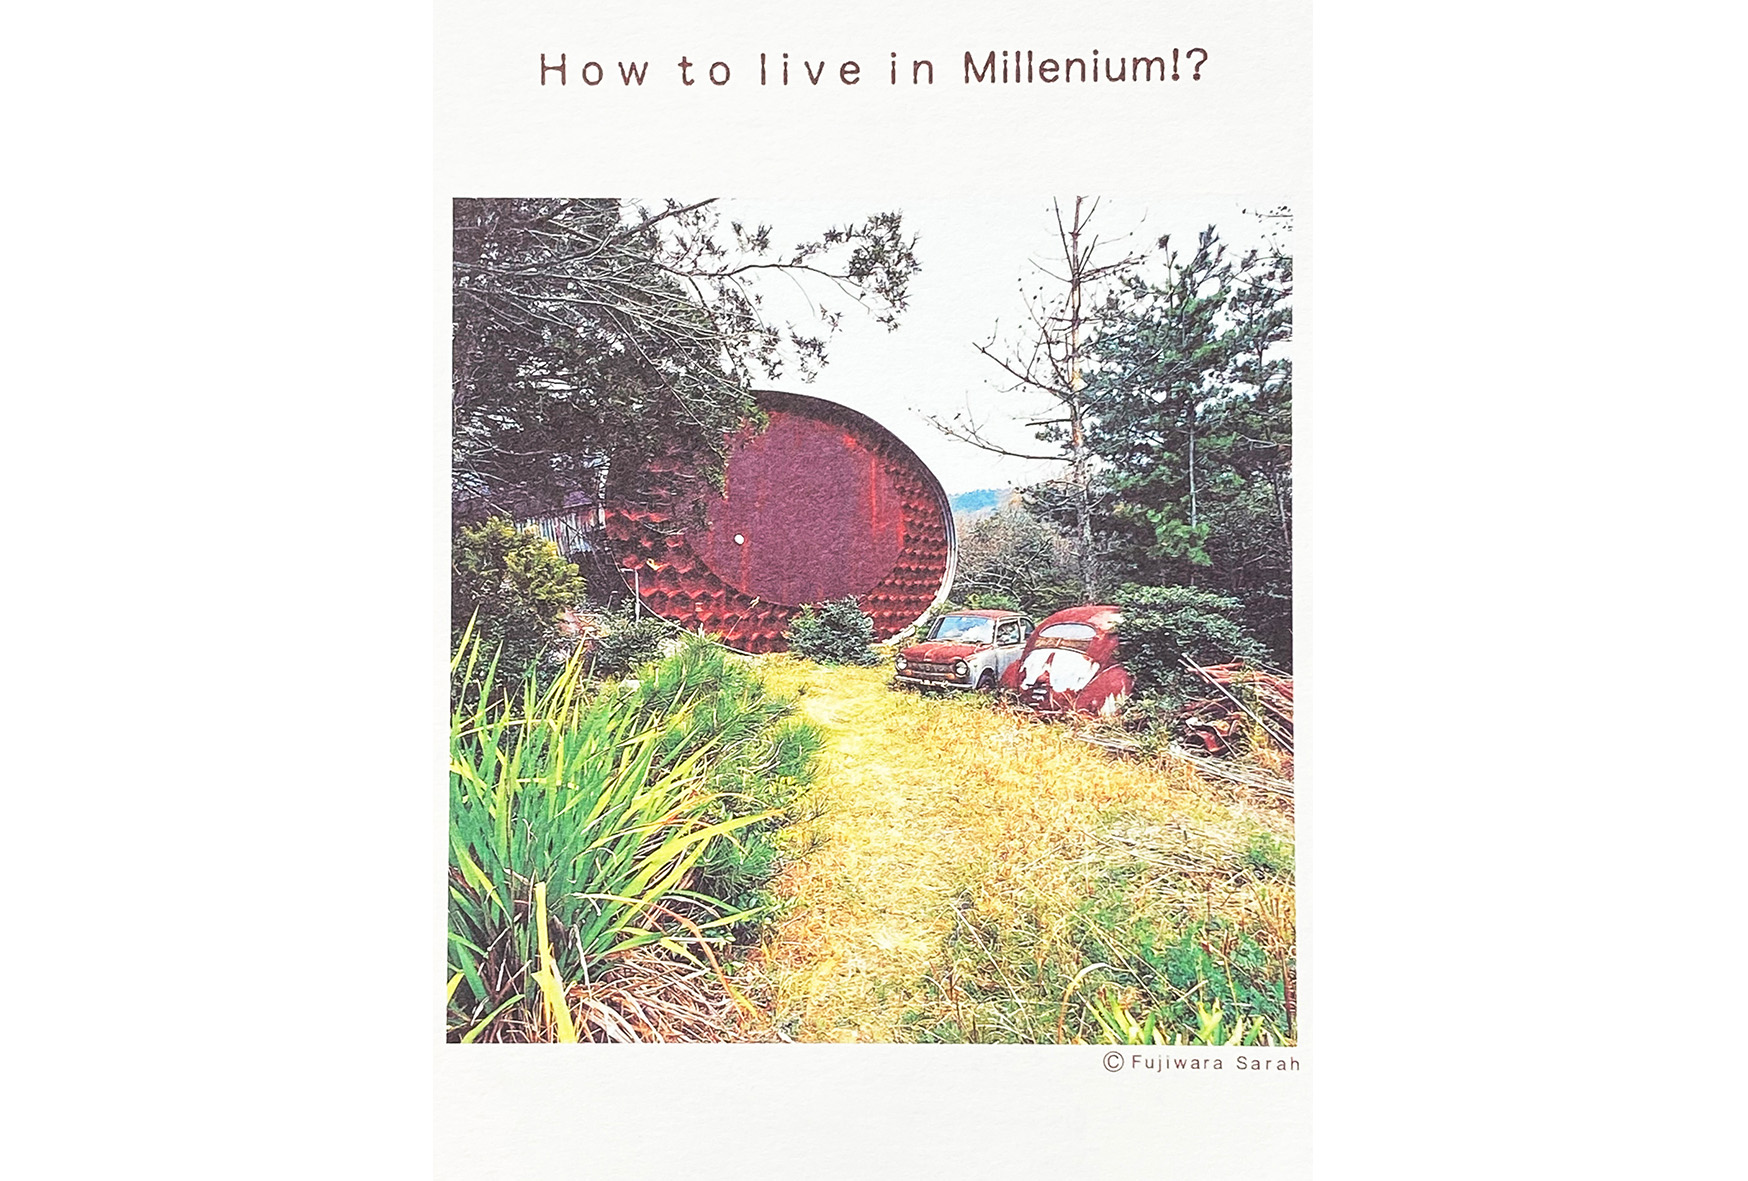 “How to live in millenium?” Nagoya design gallery, Publishing exhibition, All Japan Publishing Company, Photograph by Sarah Fujiwara July 26-31, 2000, solo show